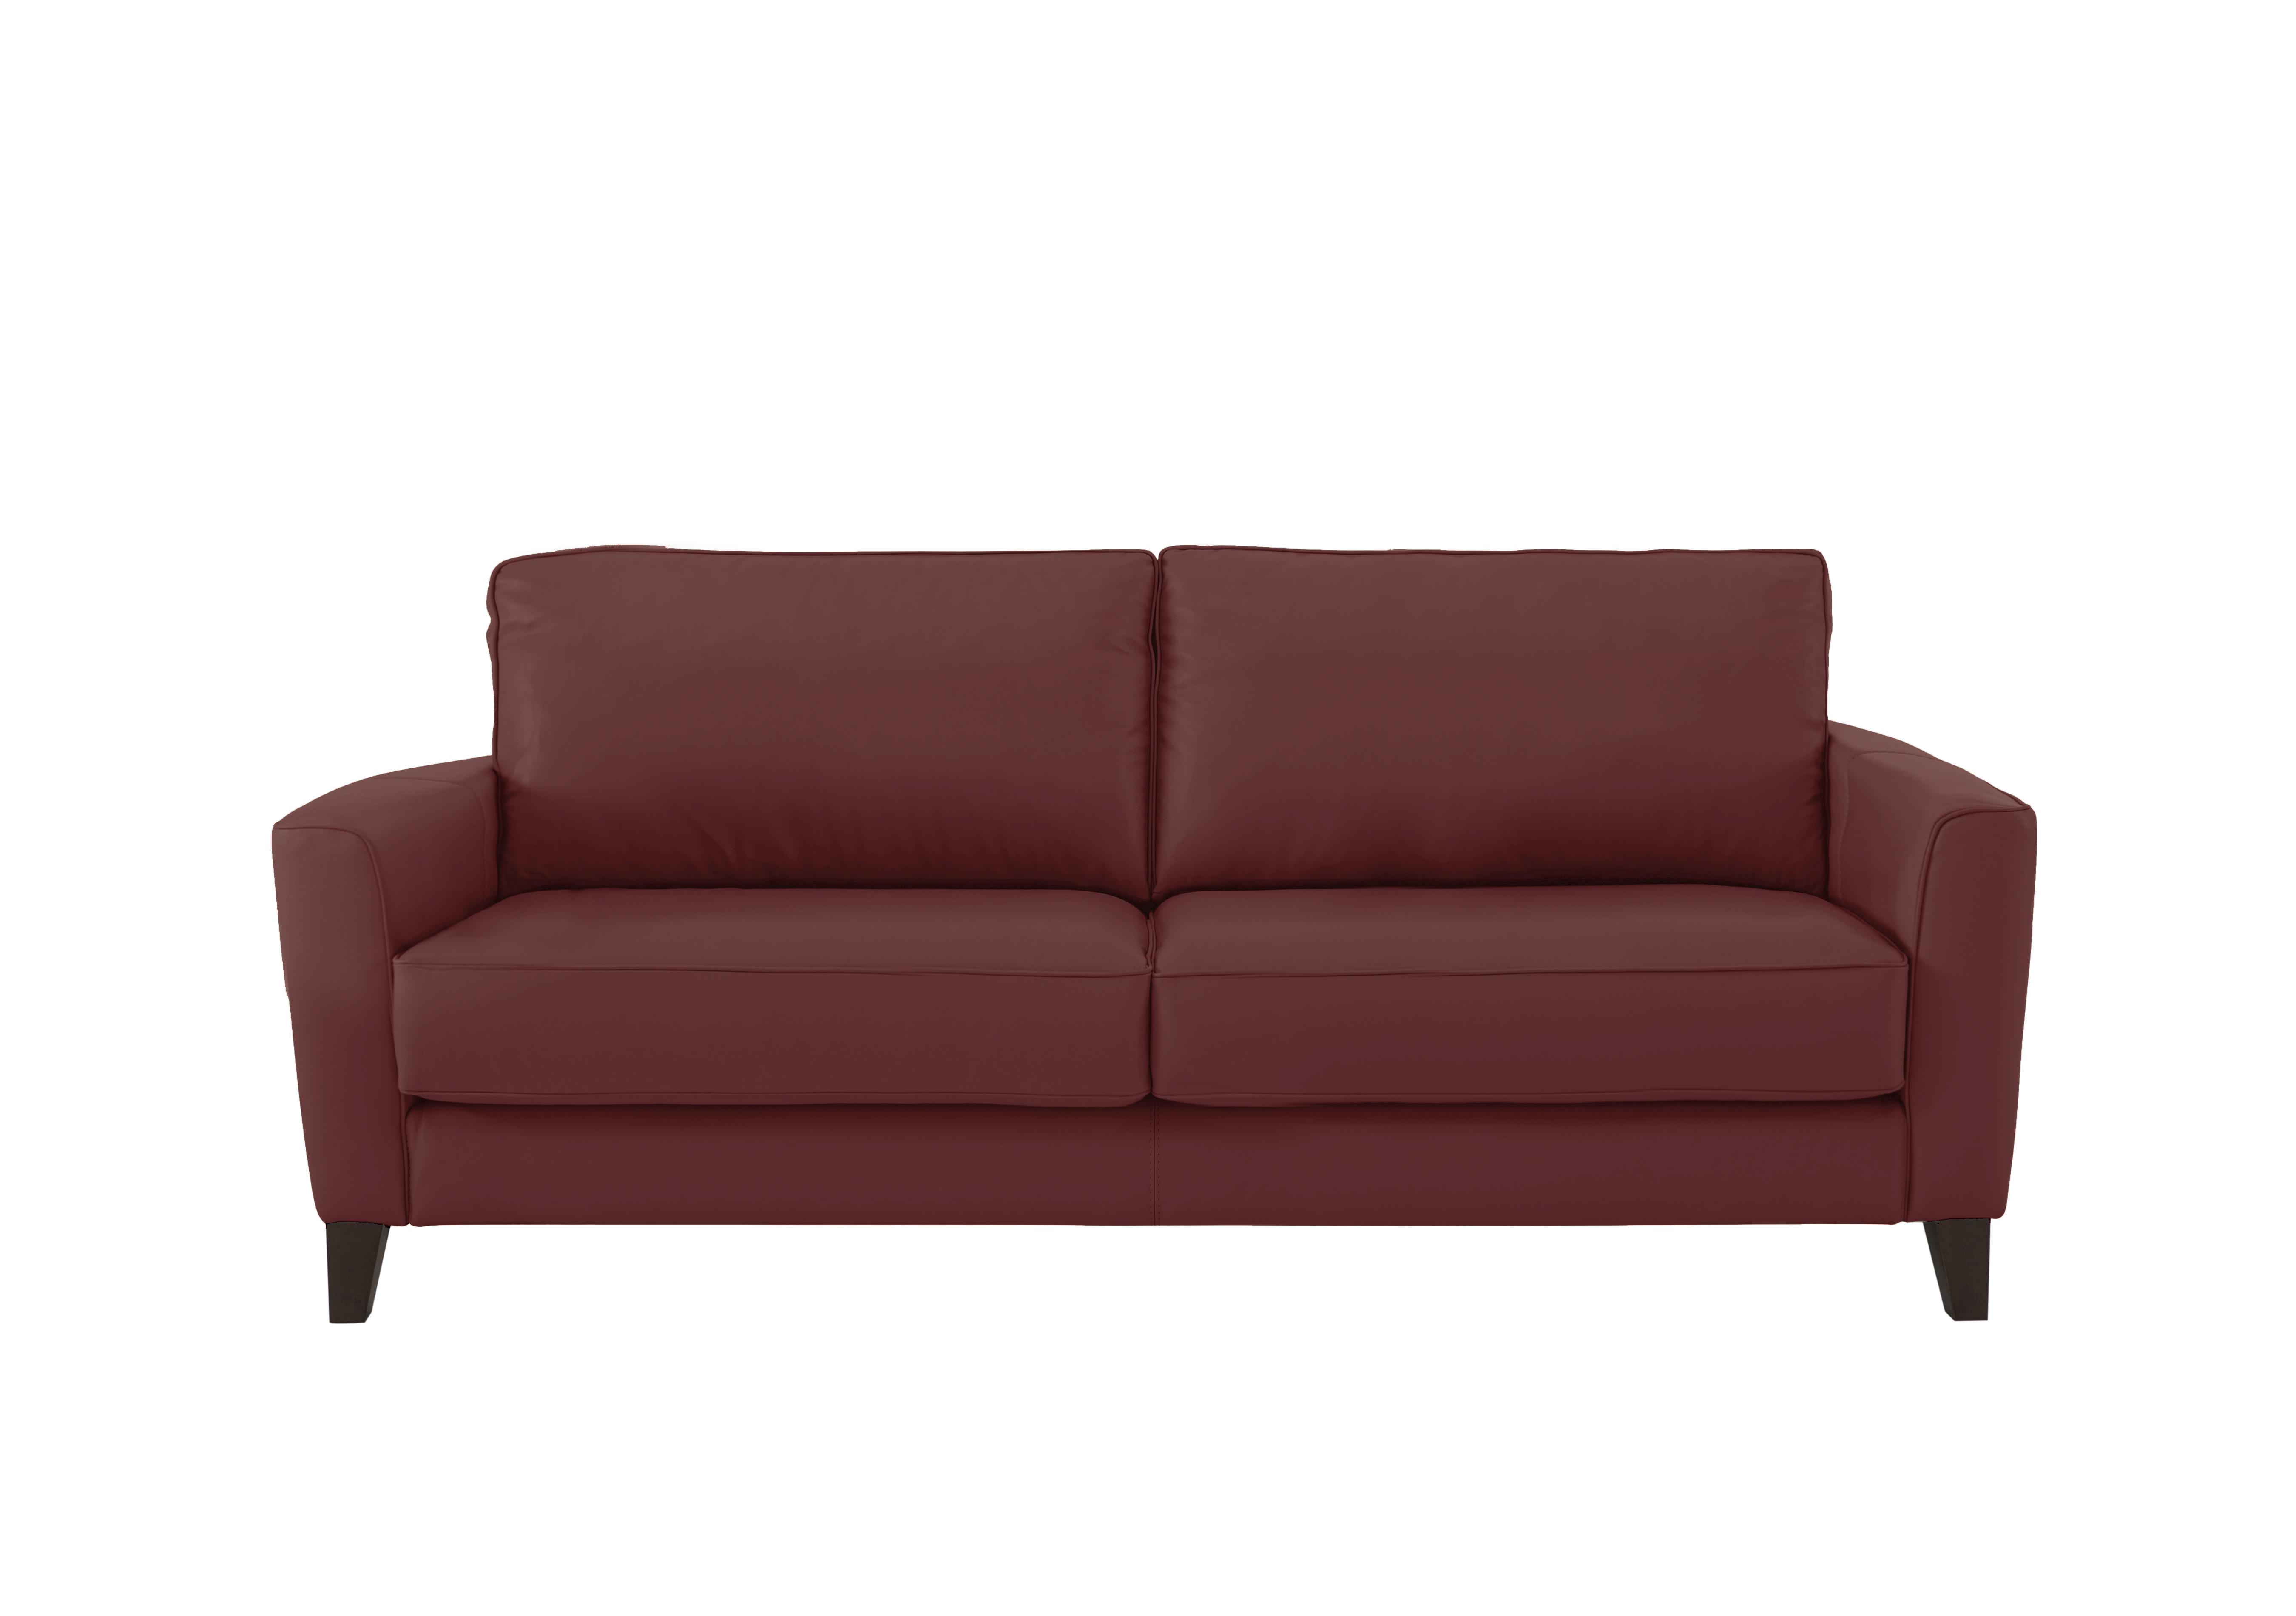 Brondby 3 Seater Leather Sofa in Bv-035c Deep Red on Furniture Village